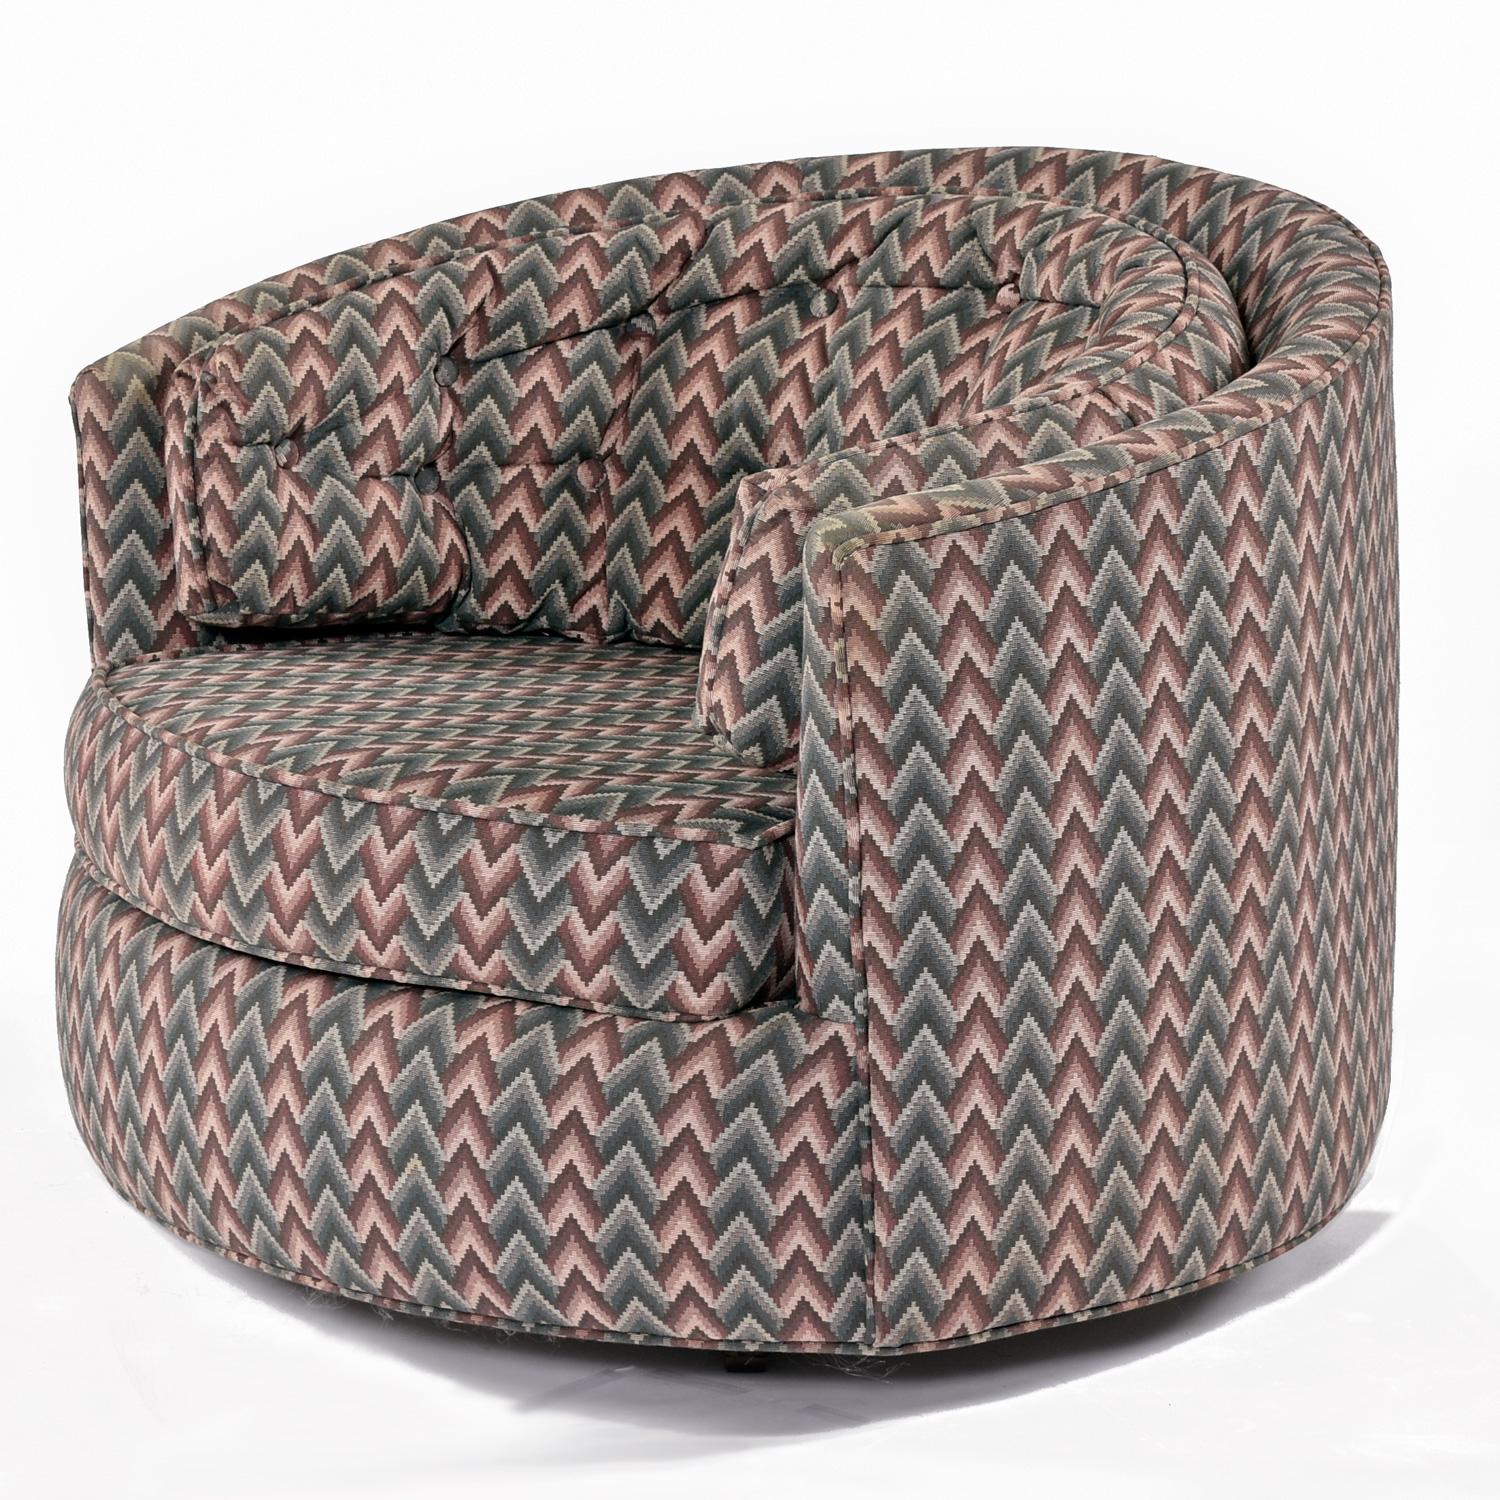 Milo Baughman Style Chevron Fabric Tufted Swivel Barrel Tub Chairs In Good Condition For Sale In Chattanooga, TN